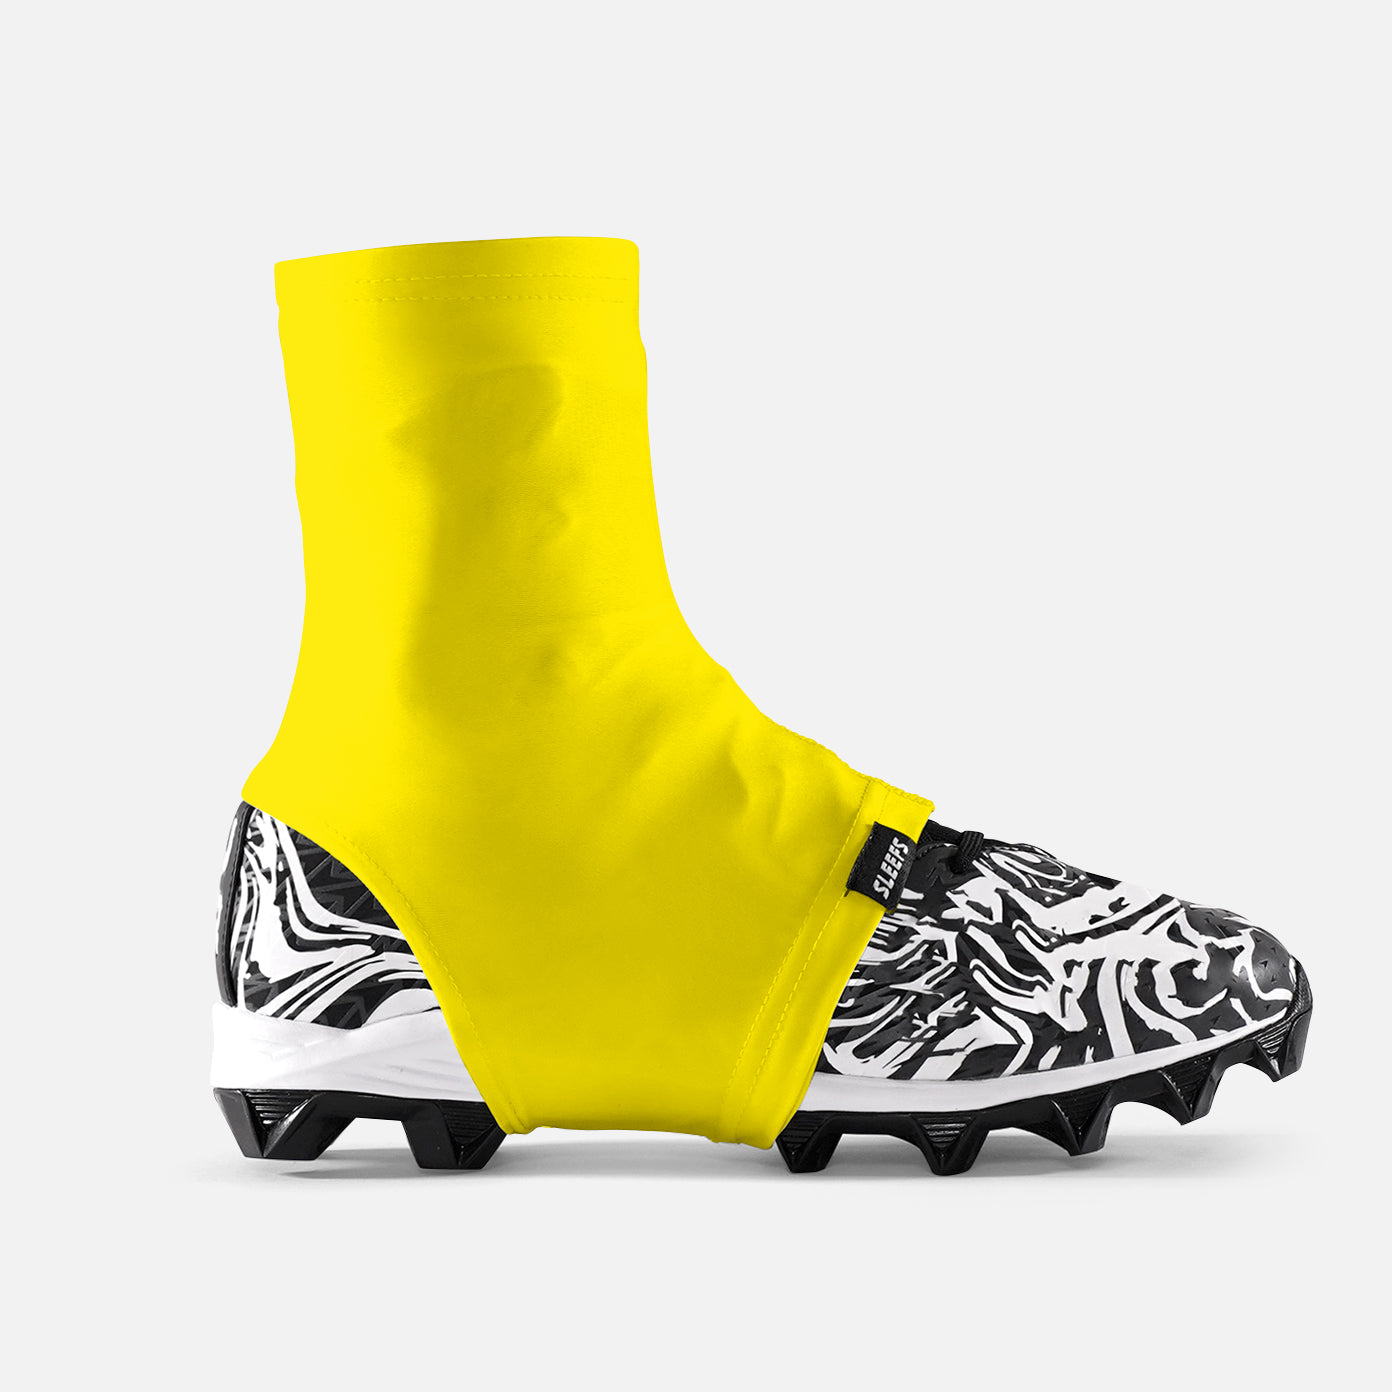 Hue Yellow Kids Spats / Cleat Covers